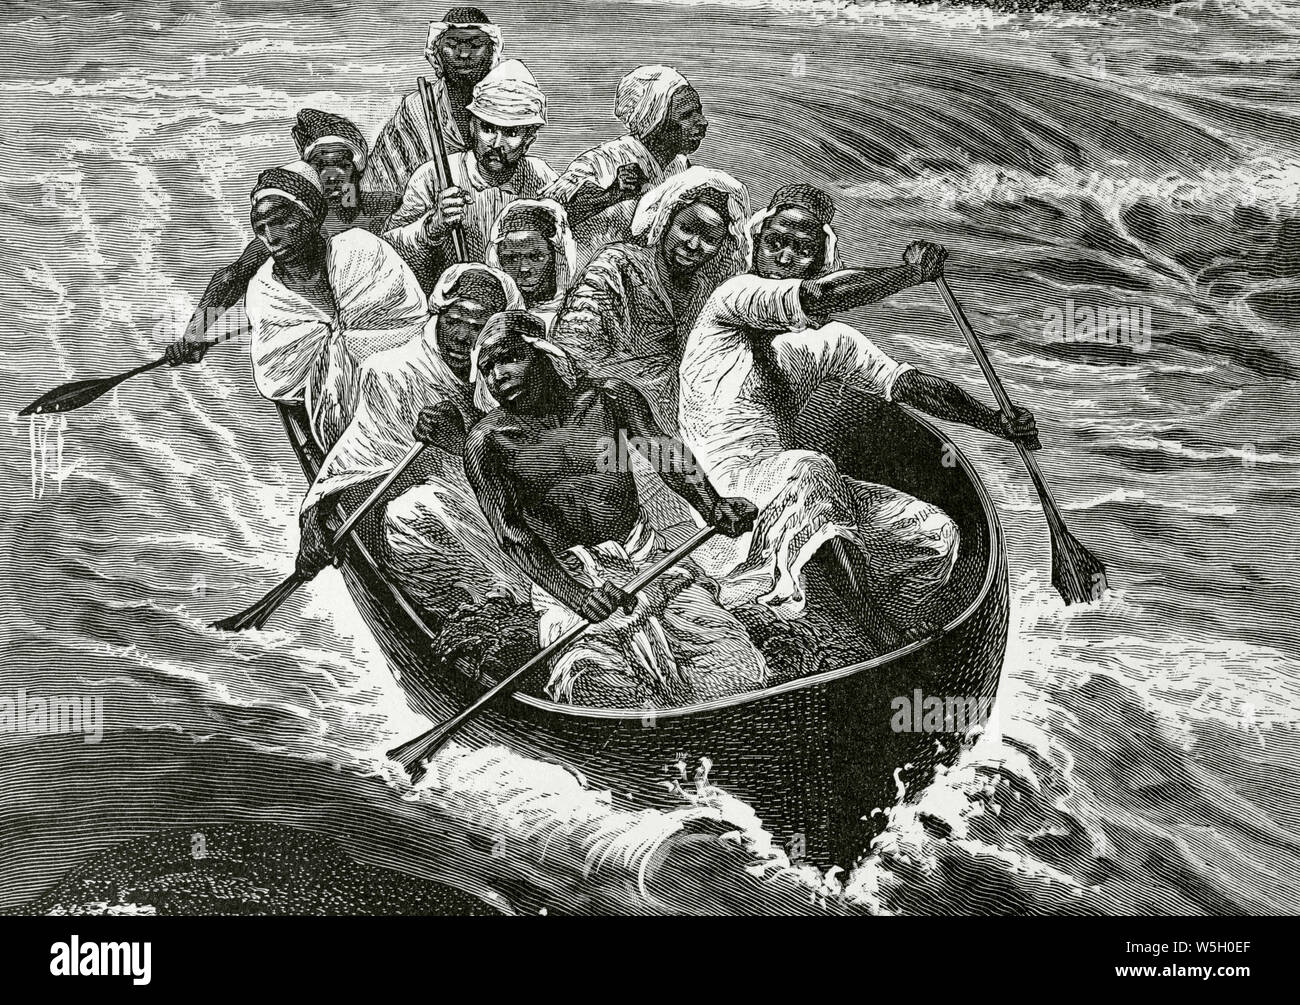 Africa. Stanley passes the Rapids of the Congo river in the canoe 'Lady Alice' (at present Democratic Republic of the Congo). Engraving. Africa inexplorada, el Continente Misterioso by Henry Morton Stanley, c. 1887. Stock Photo